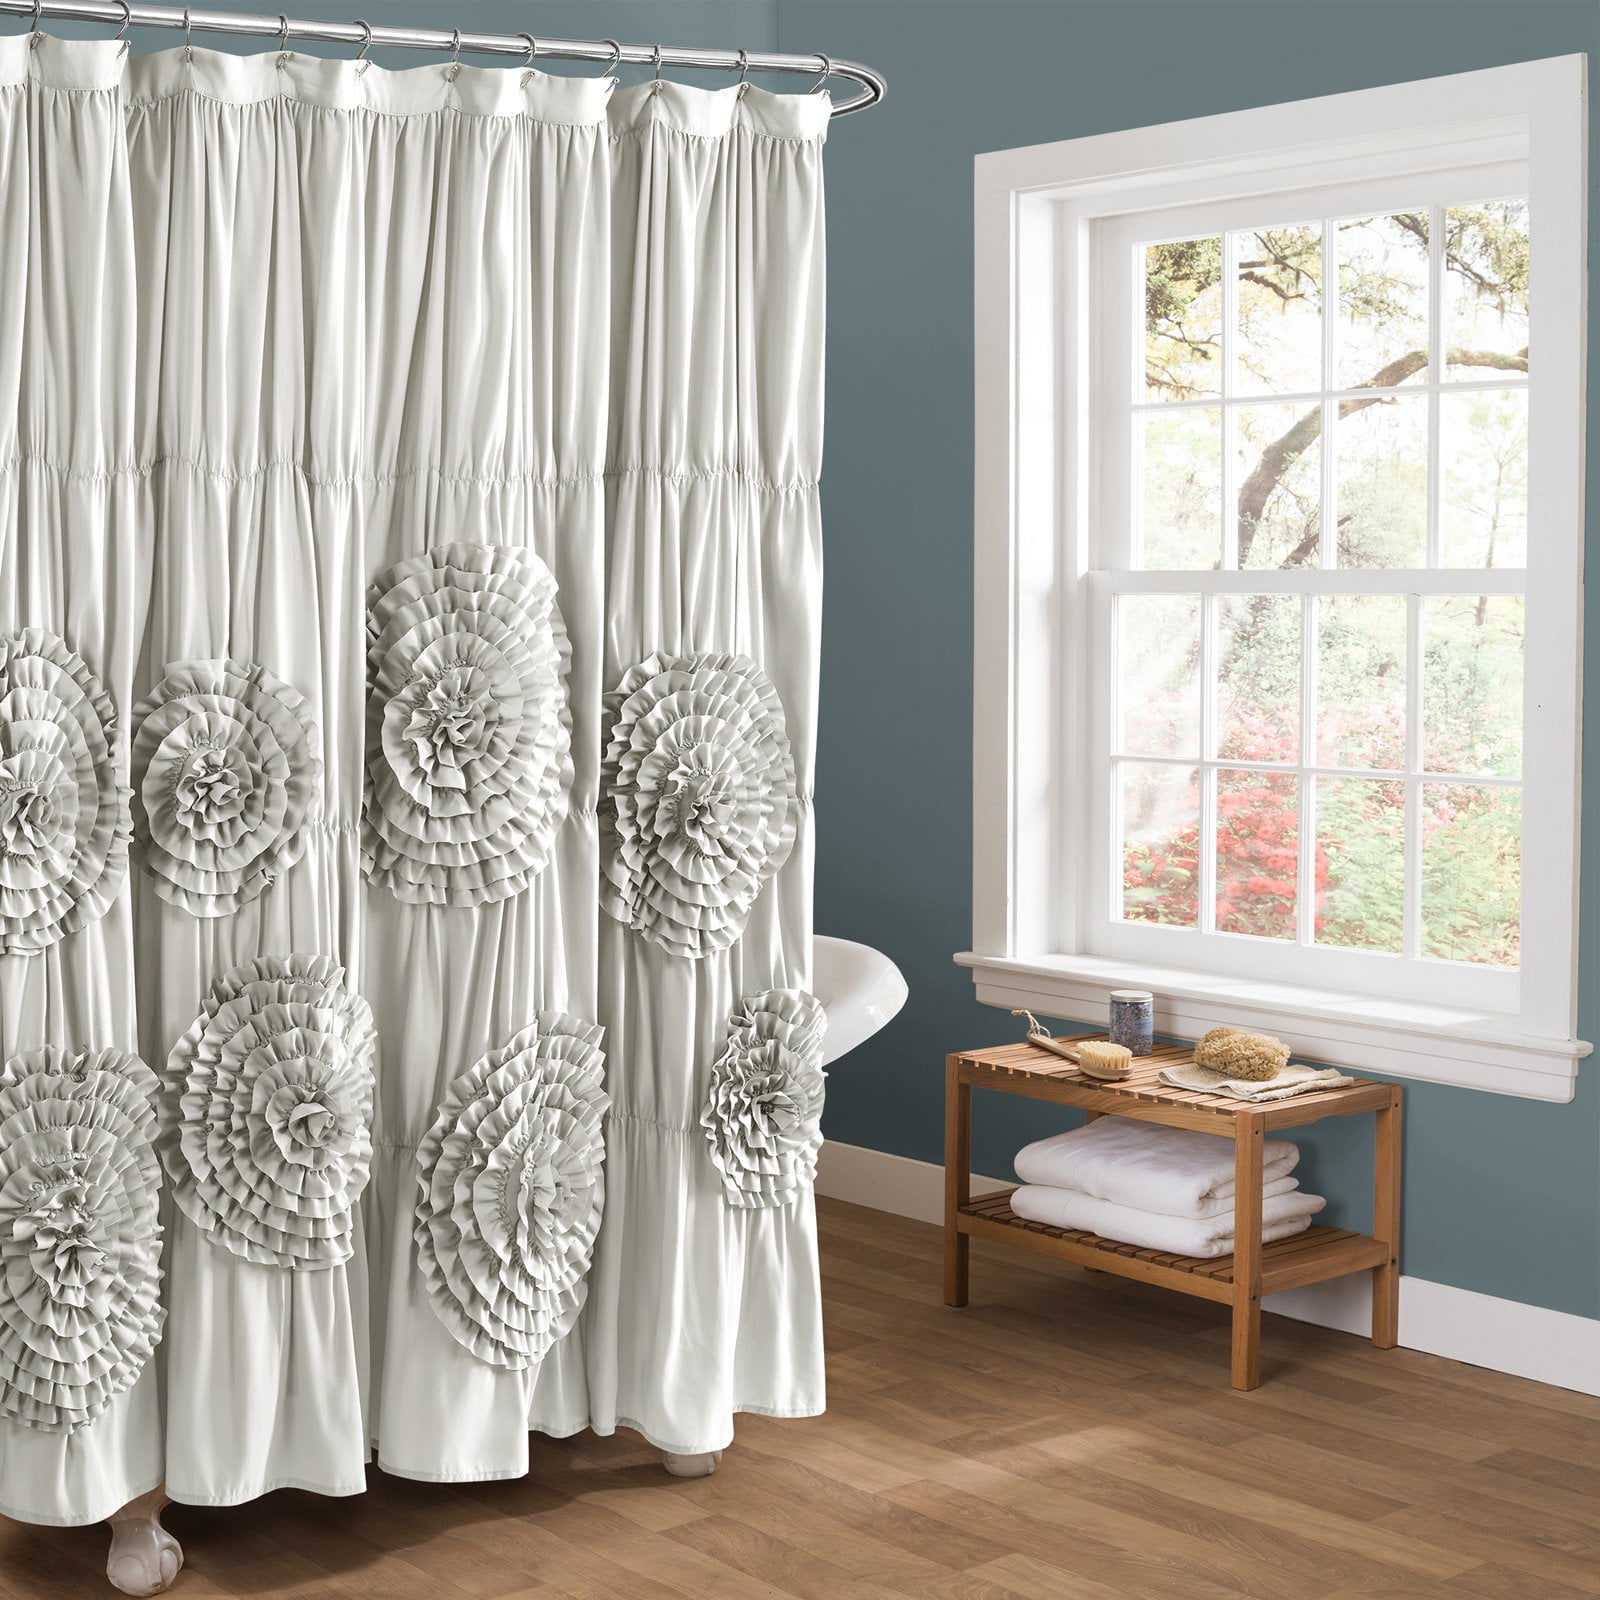 D DS CURTAIN Ombre Lace Gray Fabric Printed Grey Waterproof Polyester Shower Curtain for Bathroom,72 W x 72 H